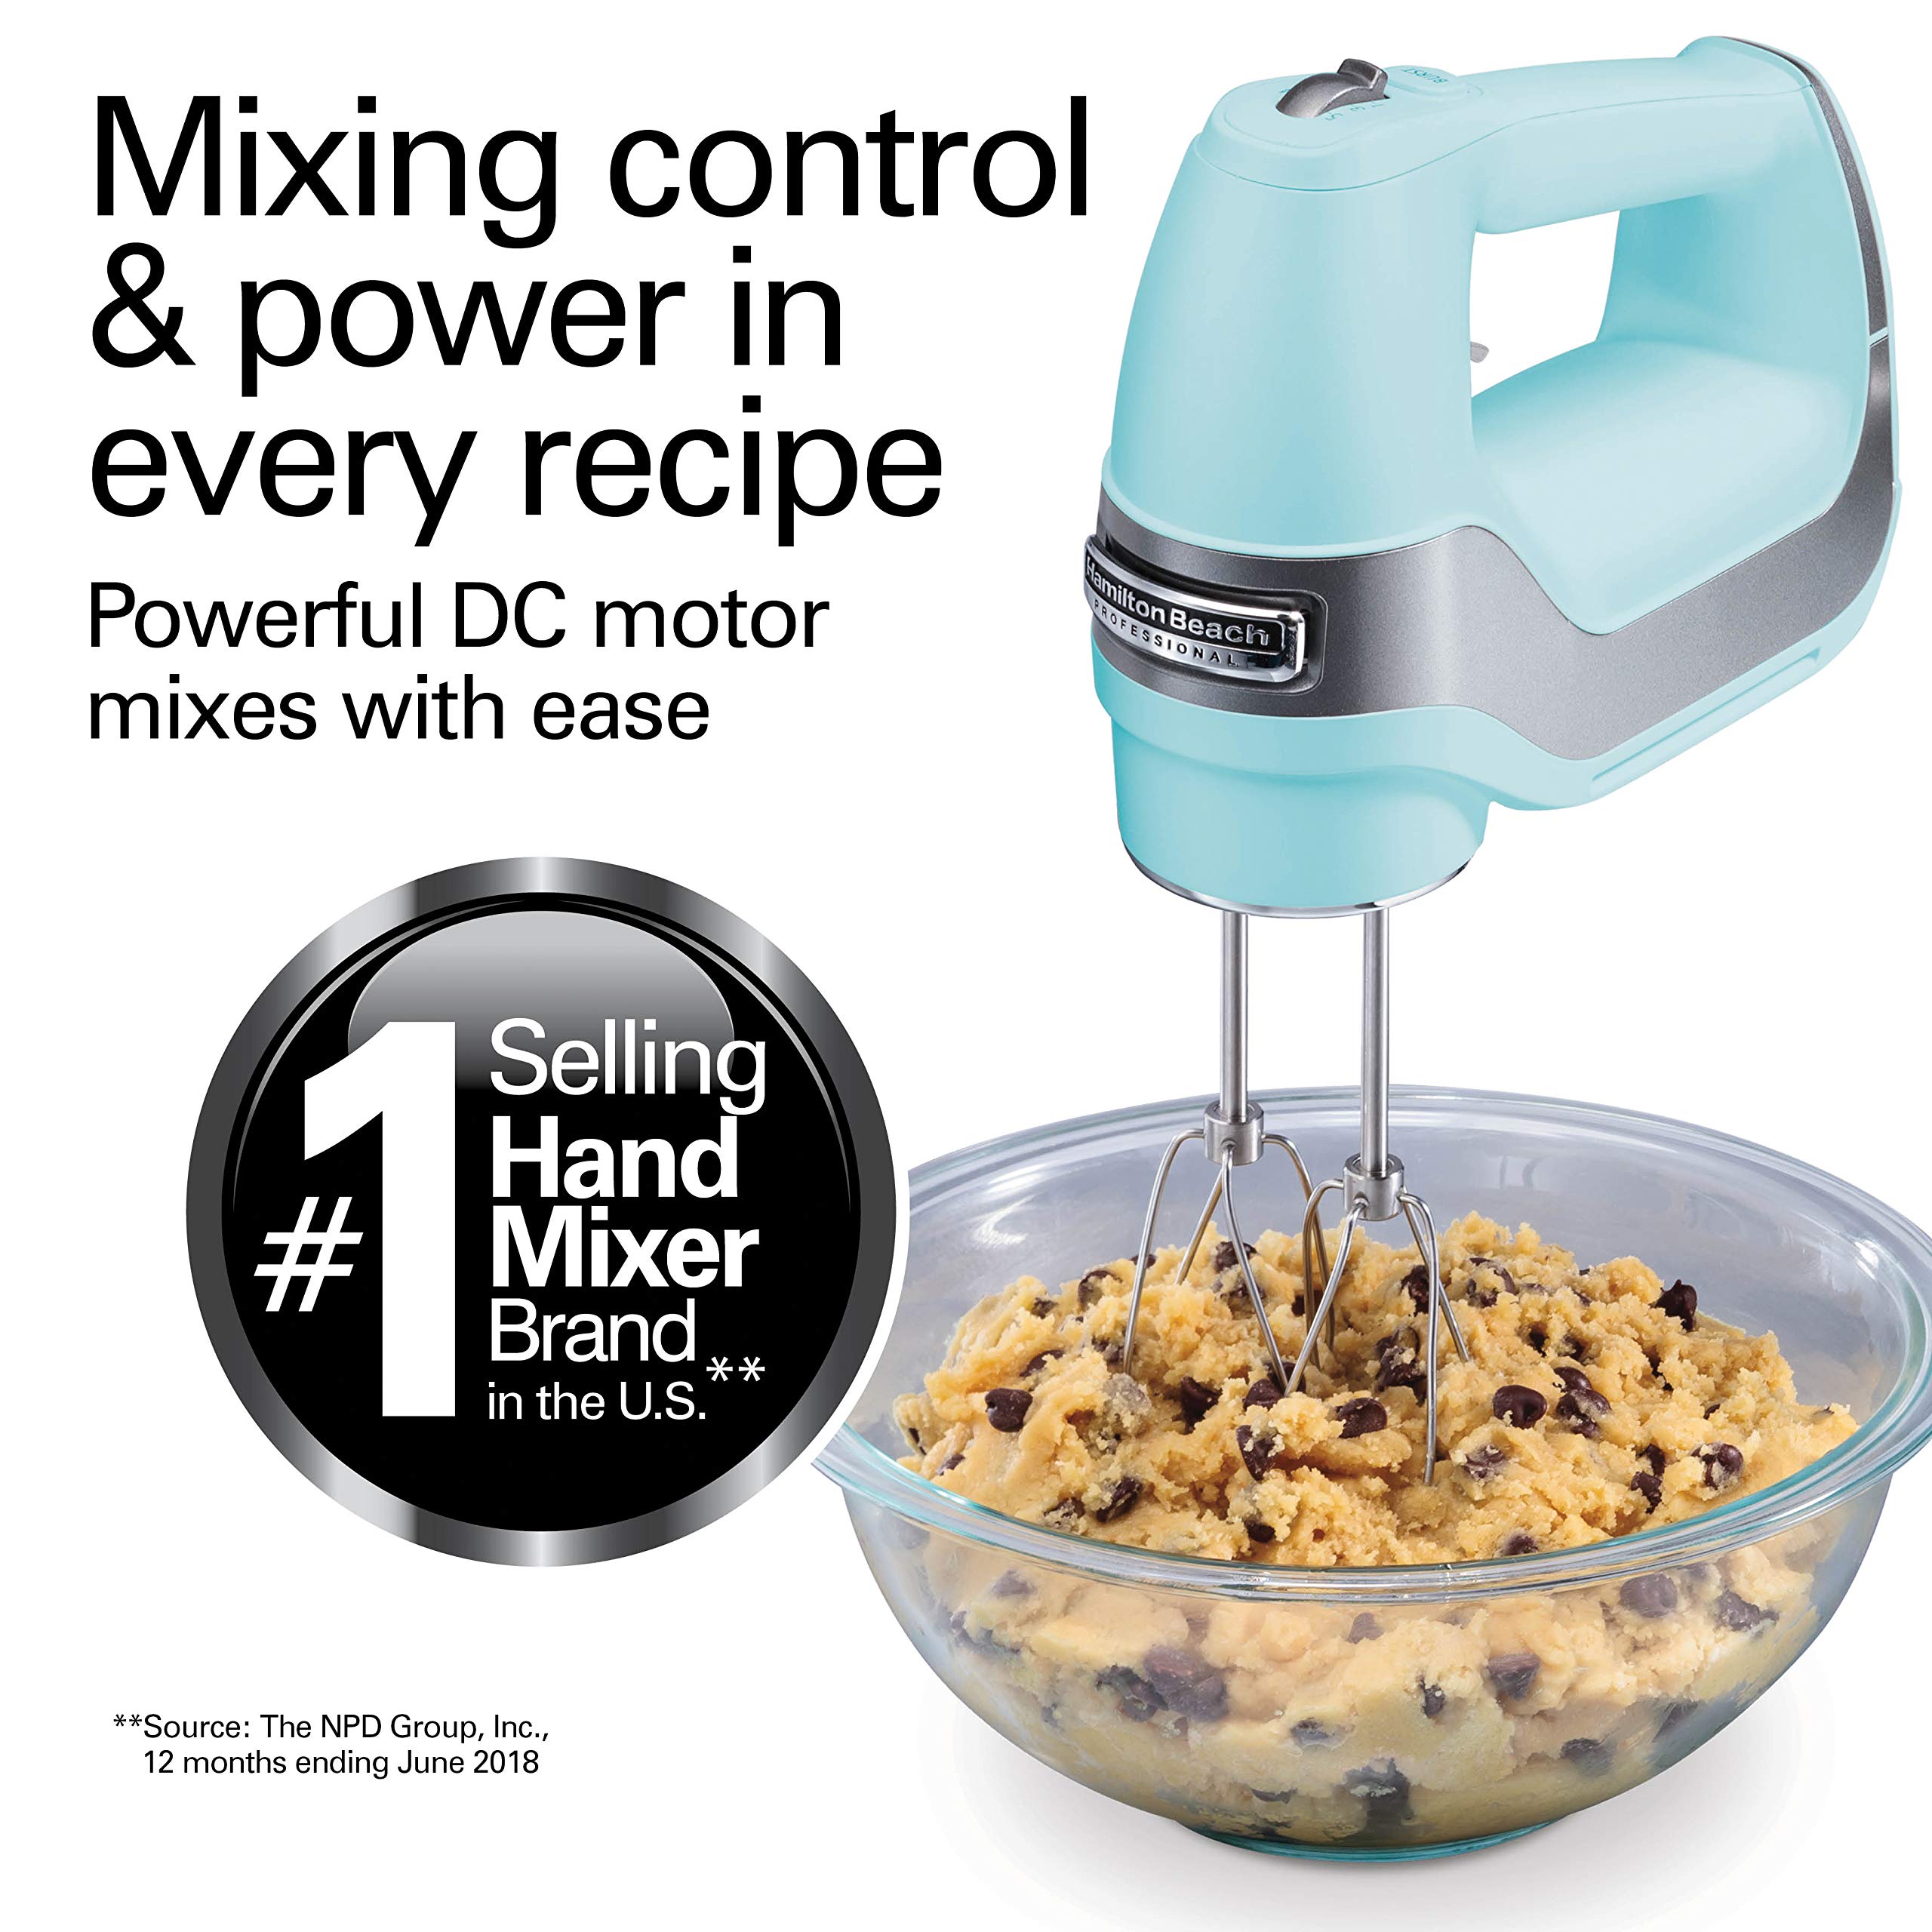 Hamilton Beach Professional 5-Speed Electric Hand Mixer with High-Performance DC Motor, Slow Start, Snap-On Storage Case, Stainless Steel Beaters & Whisk, Mint (62658)